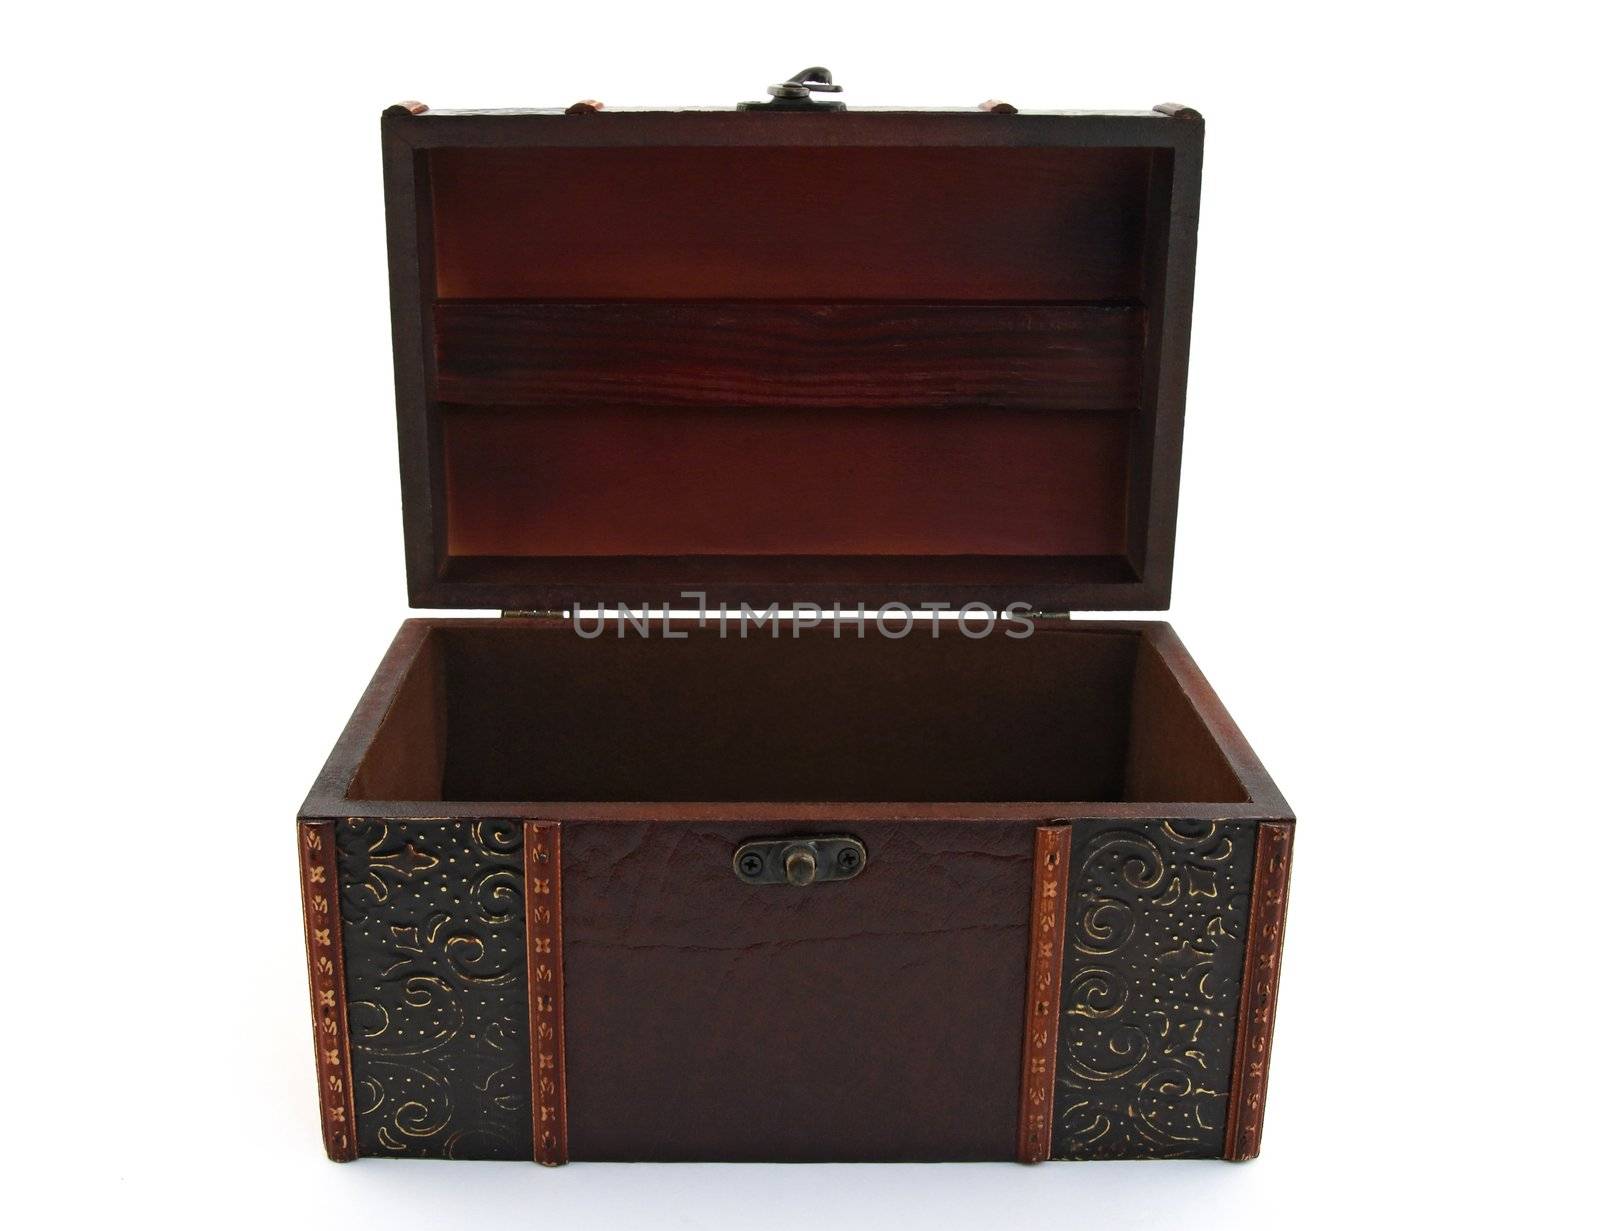 Empty wooden treasure chest over white background.